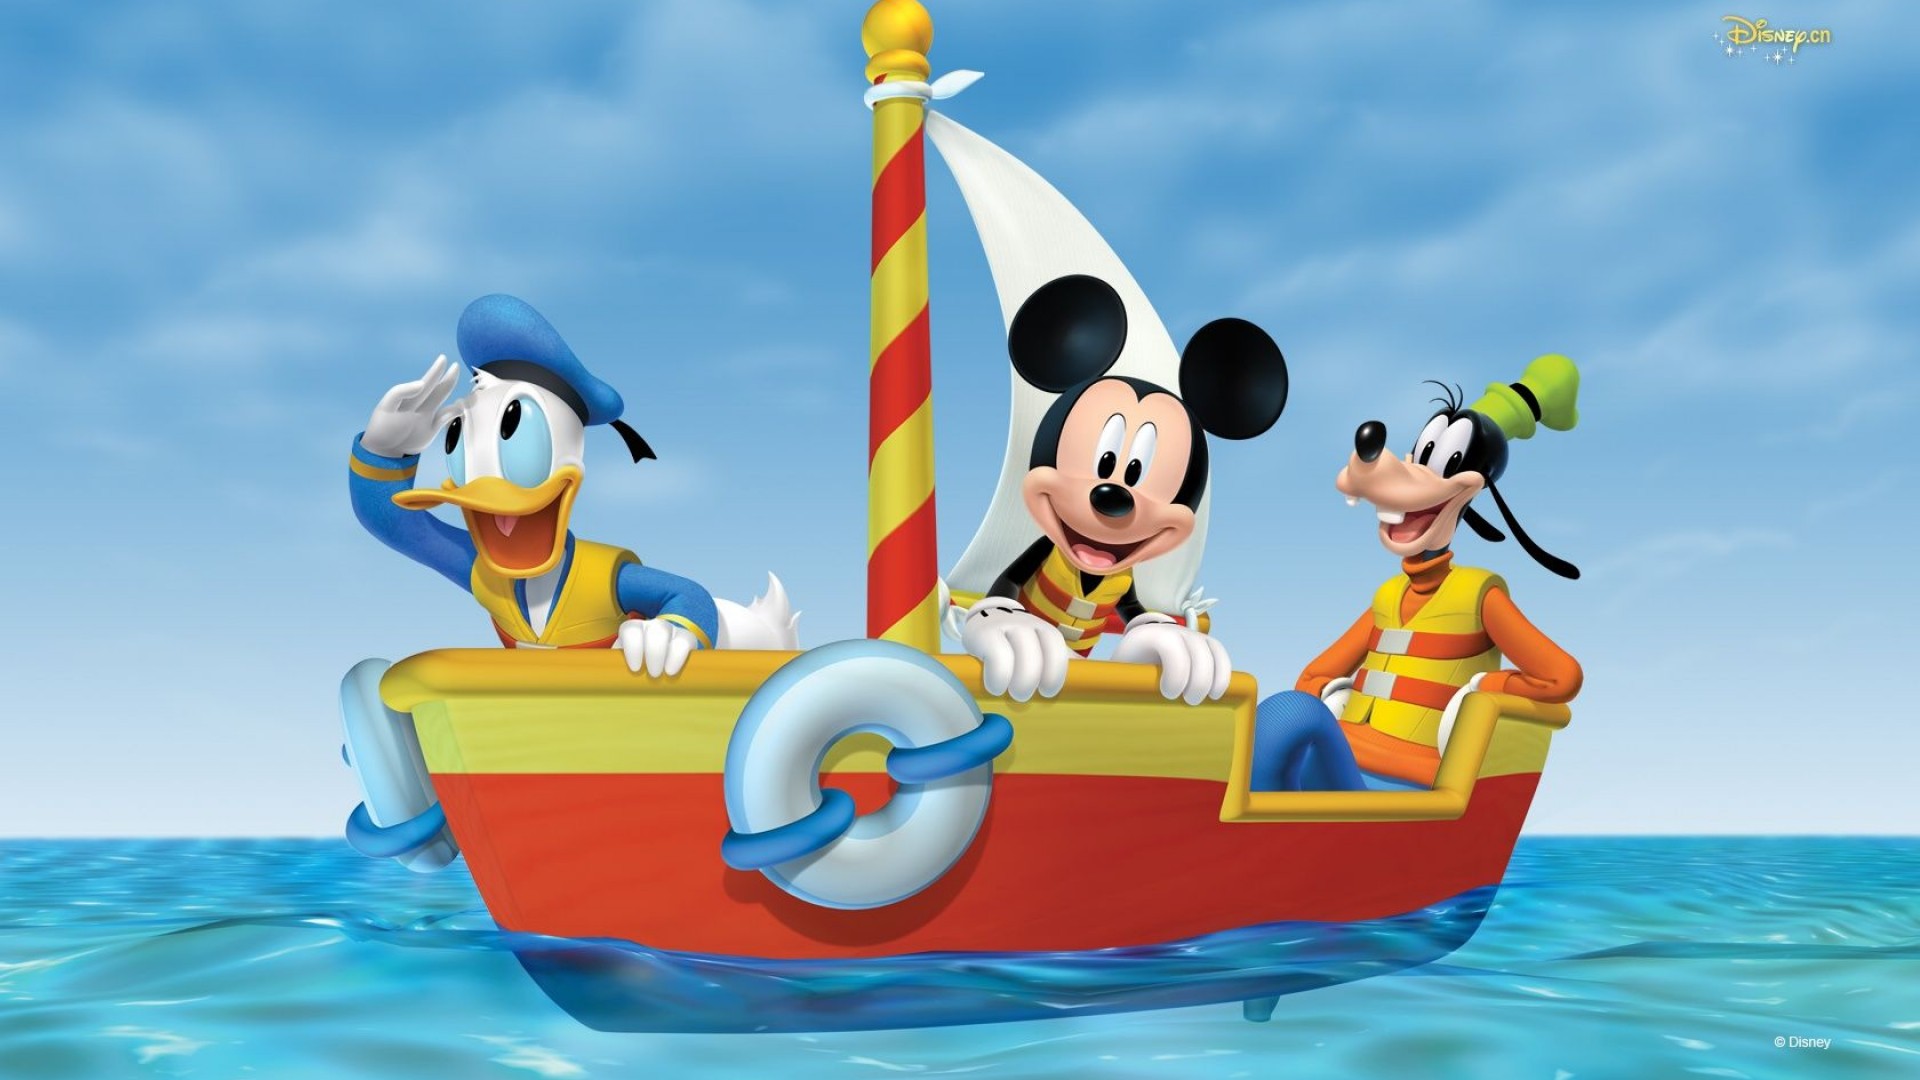 Mickey Mouse Clubhouse Wallpaper